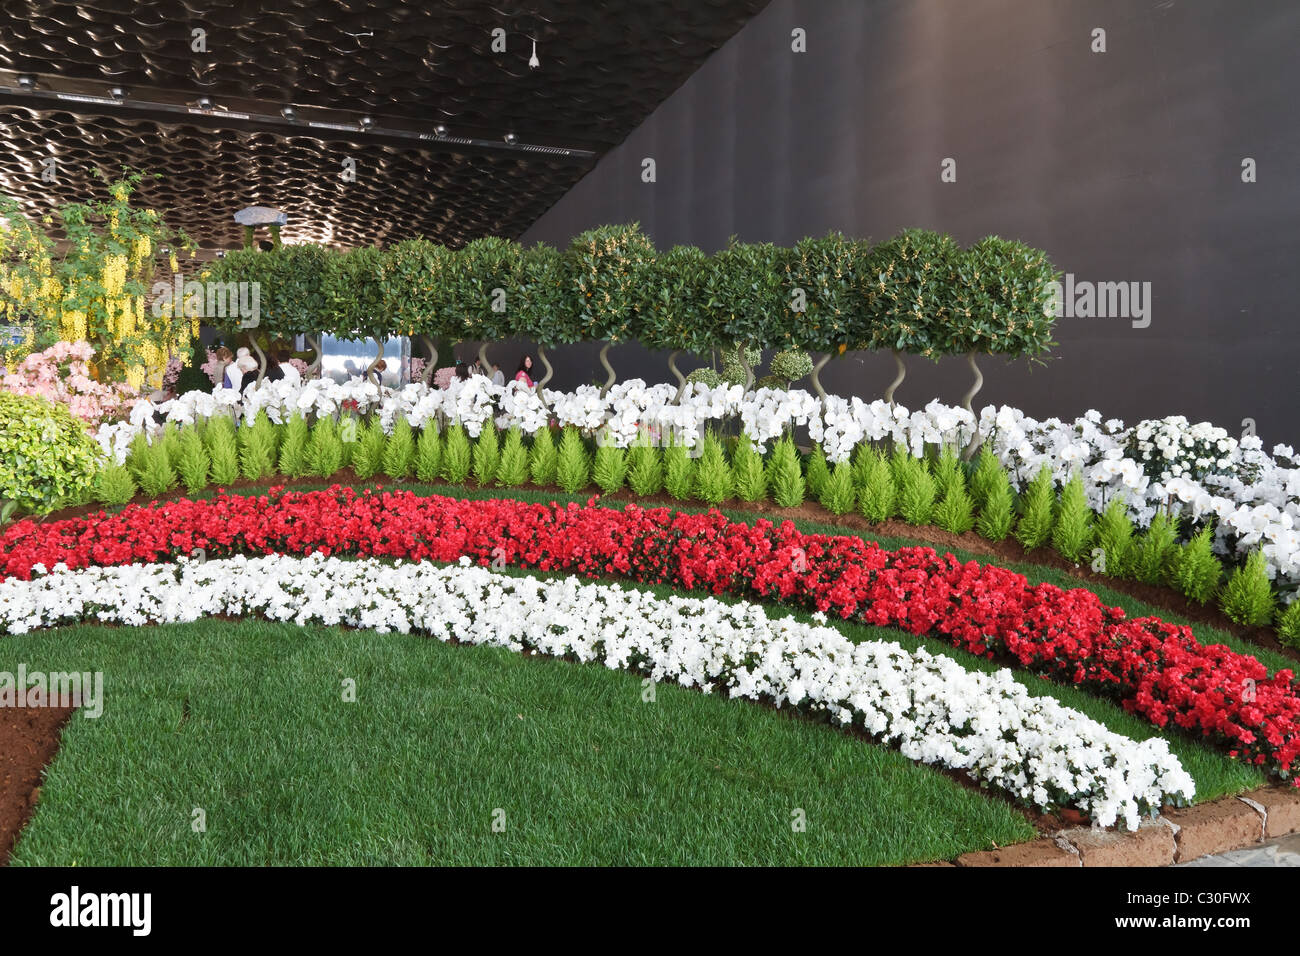 April 22, 2011 Genova, Italy: stand in Euroflora, the most important Italian horticultural show held every 5 years in Genoa. Stock Photo